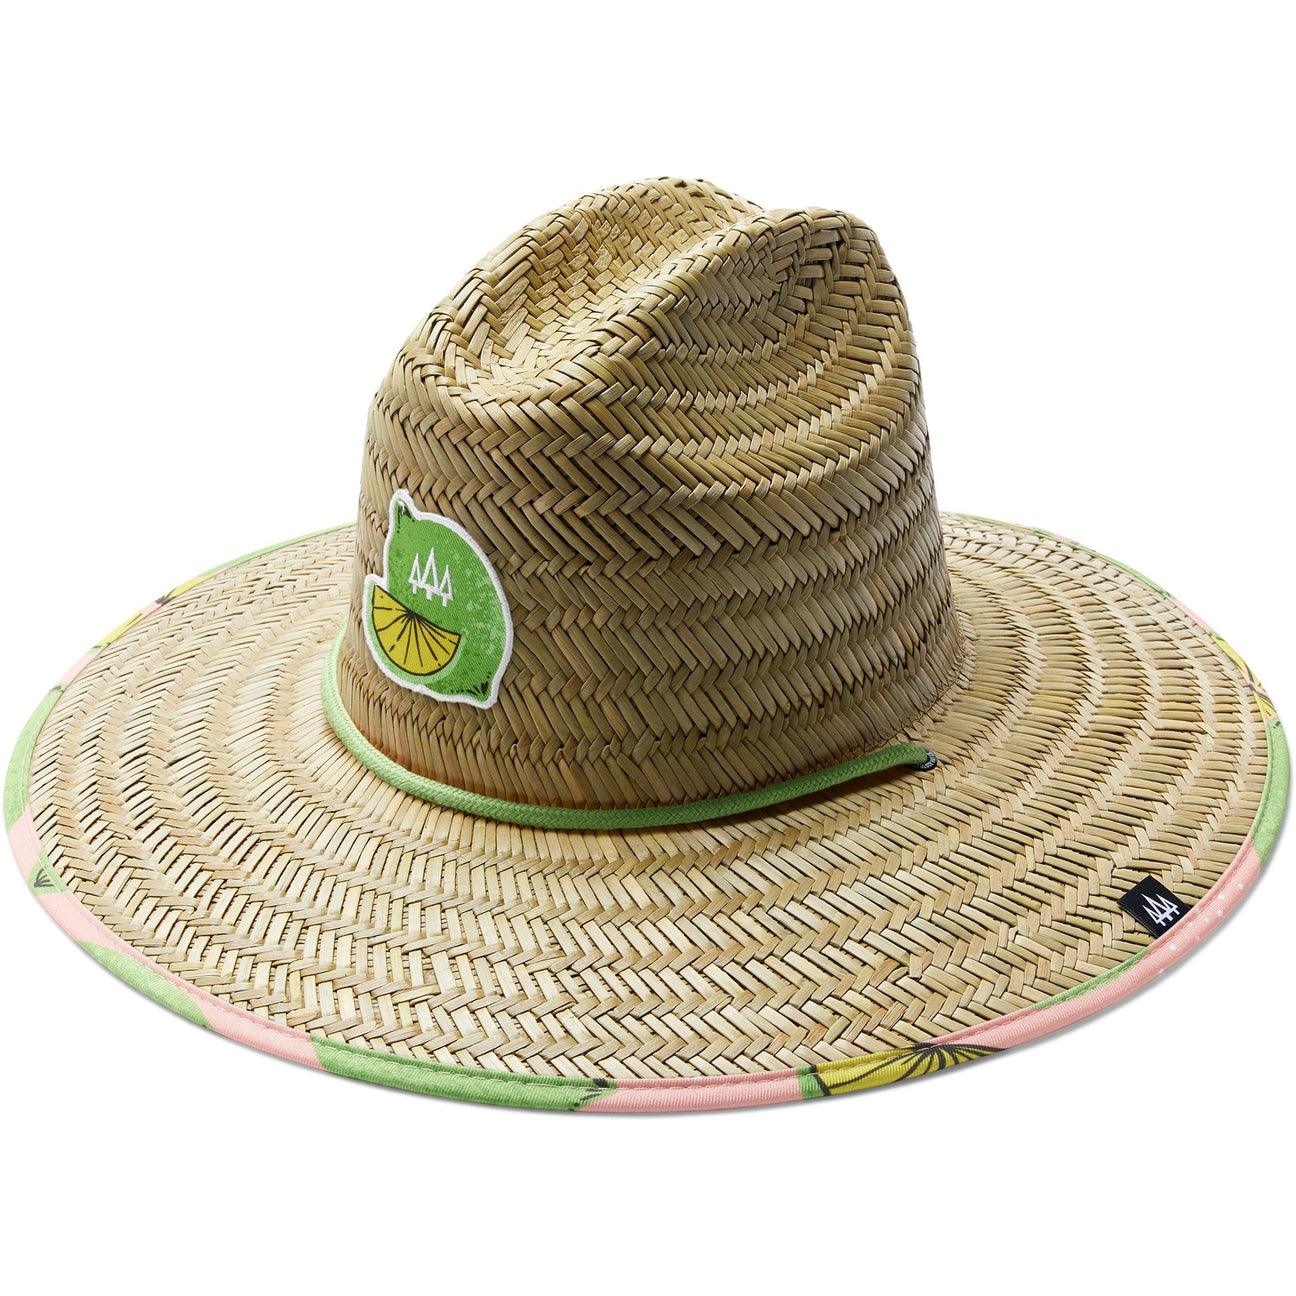 Hemlock Sun Hat  - STORE PICK UP ONLY - The Salty Mare